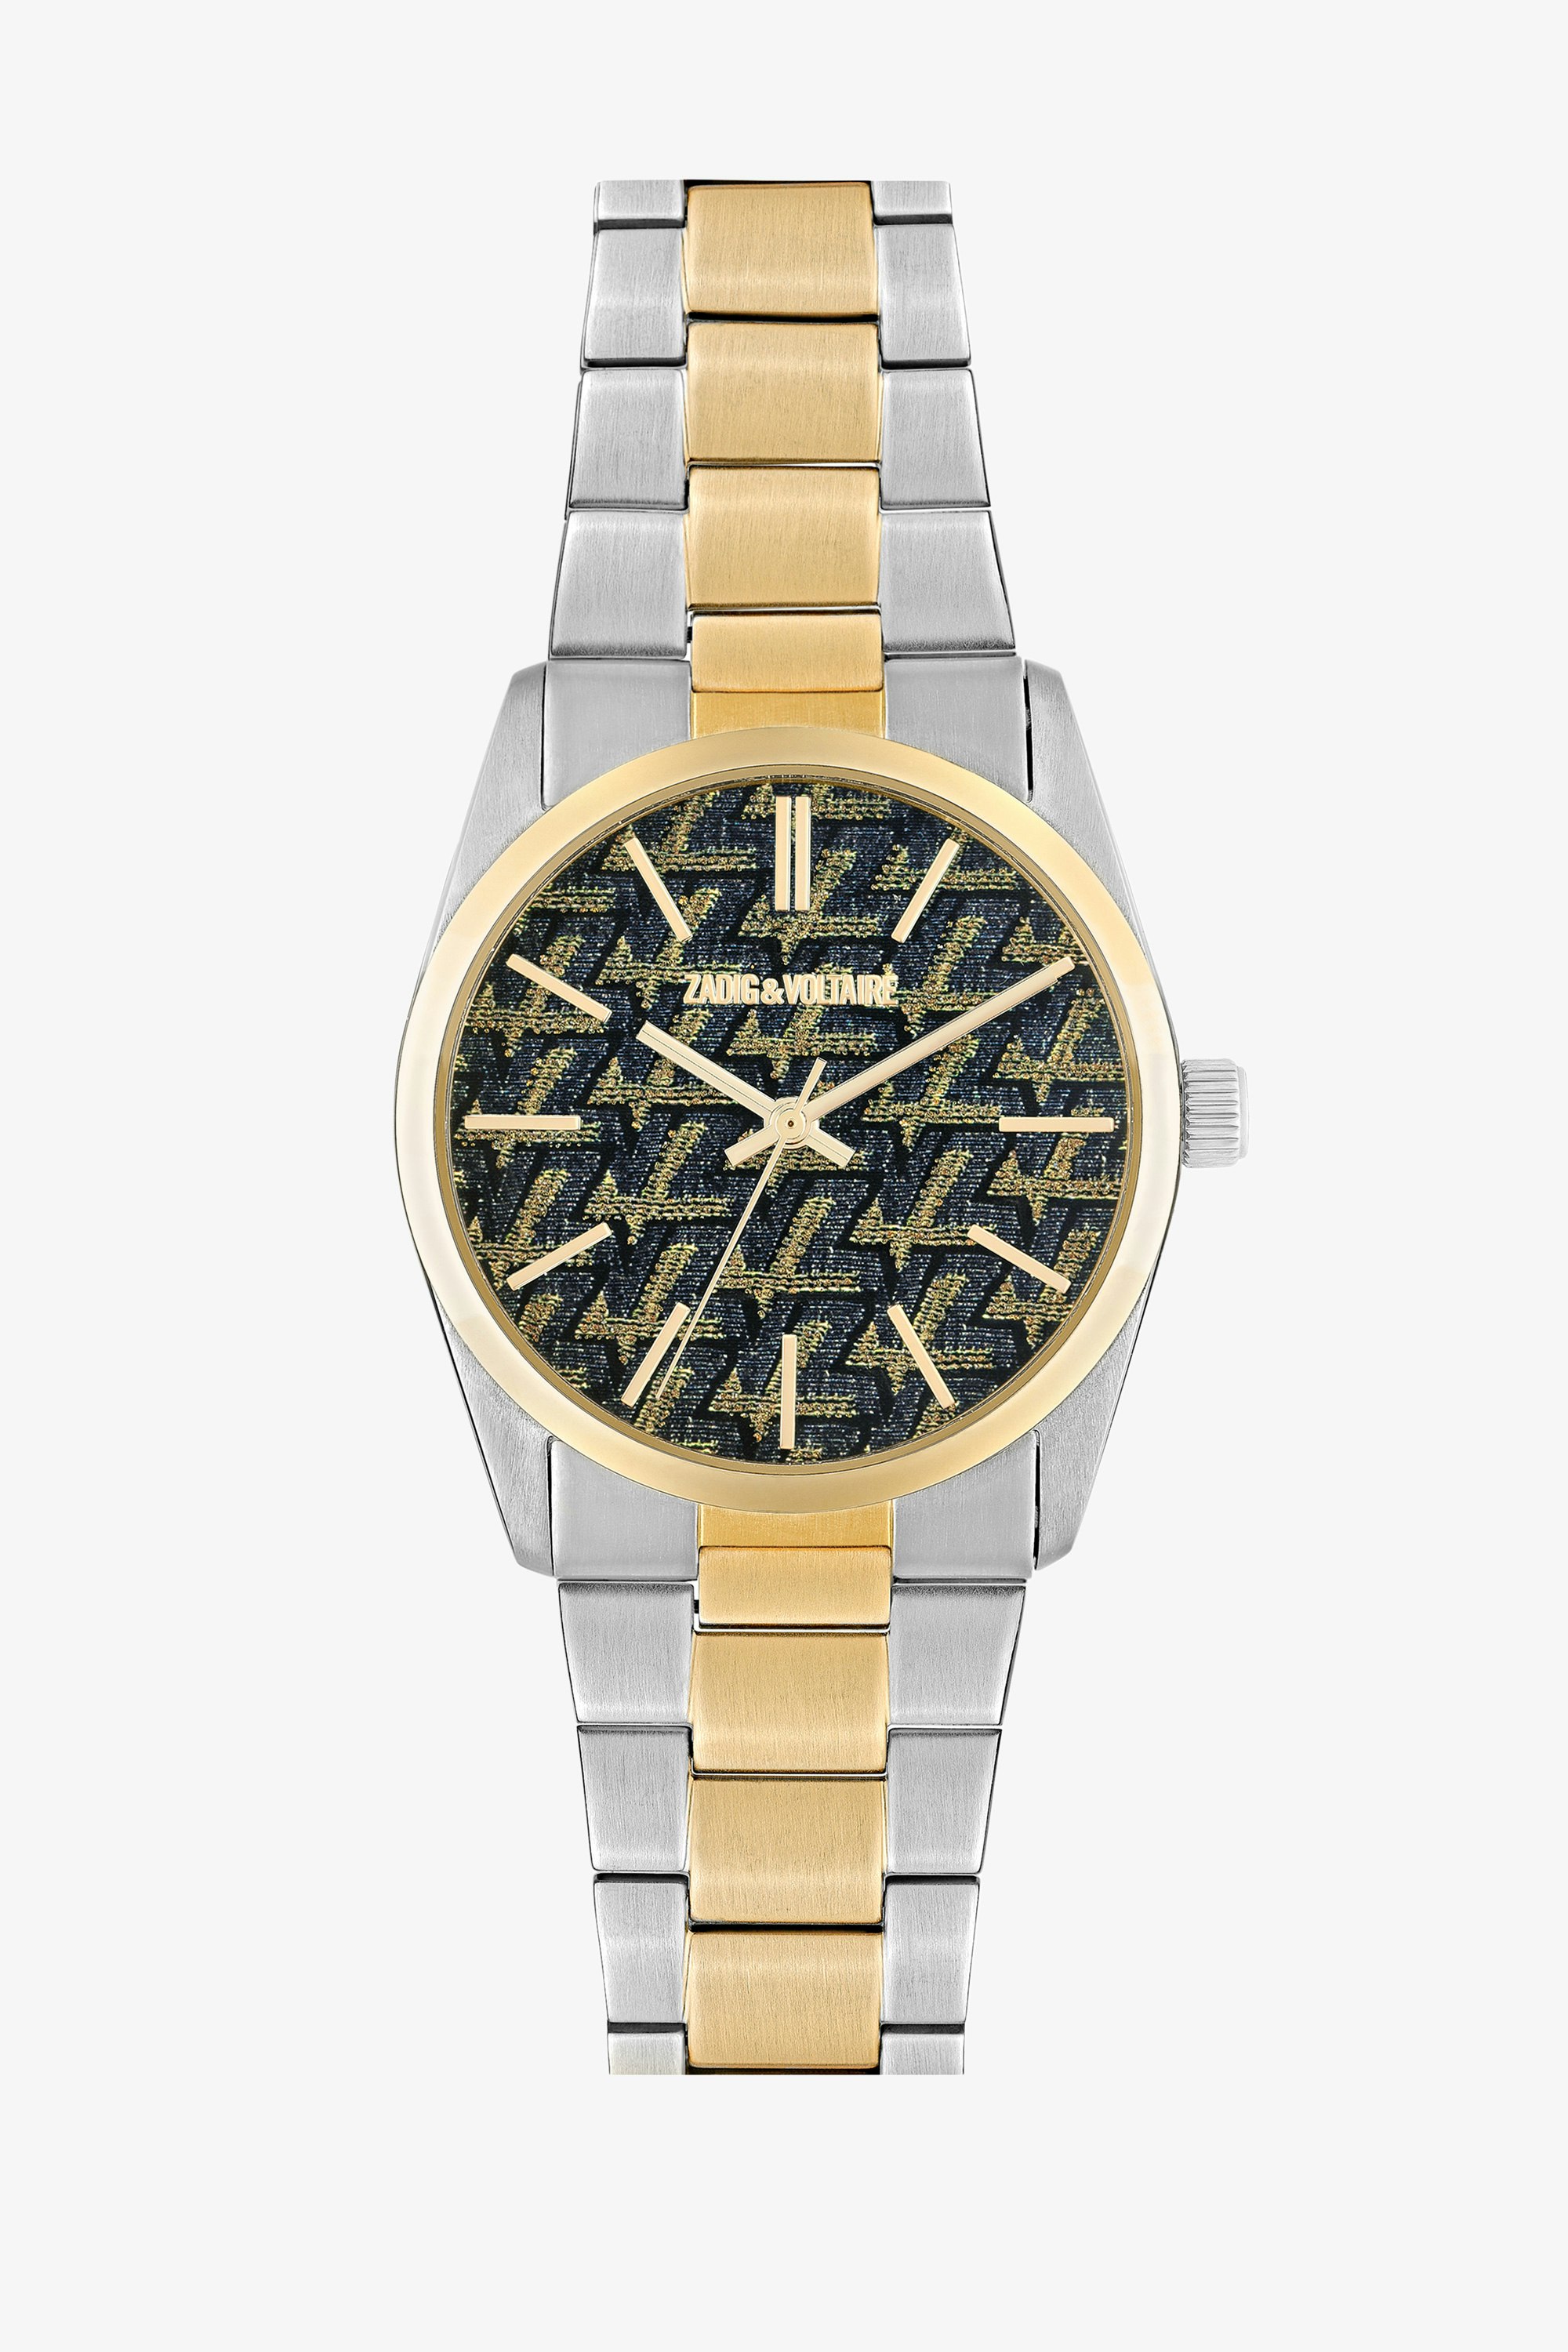 Two-Tone ZV Fusion ウォッチ Women’s two-tone gold and silver steel Fusion watch with ZV monogram dial